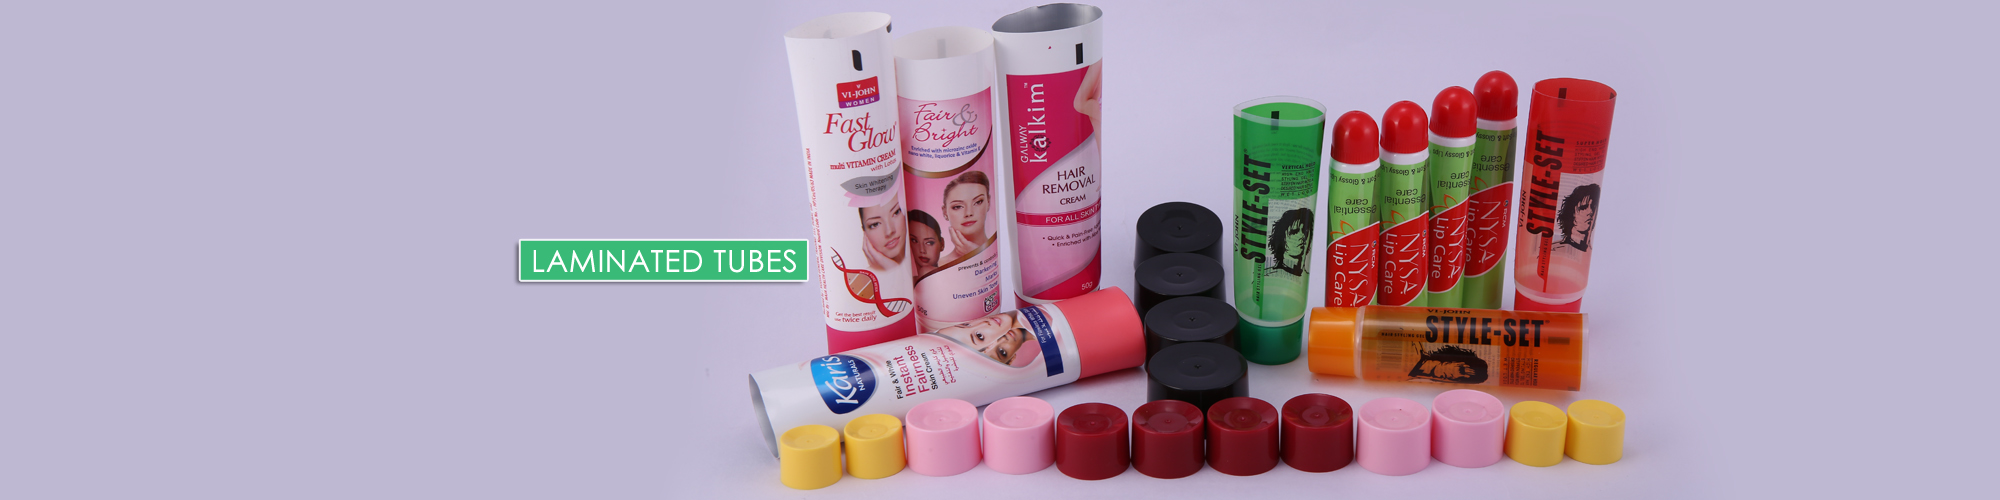 Ointment tubes Manufacturers in ncr/delhi